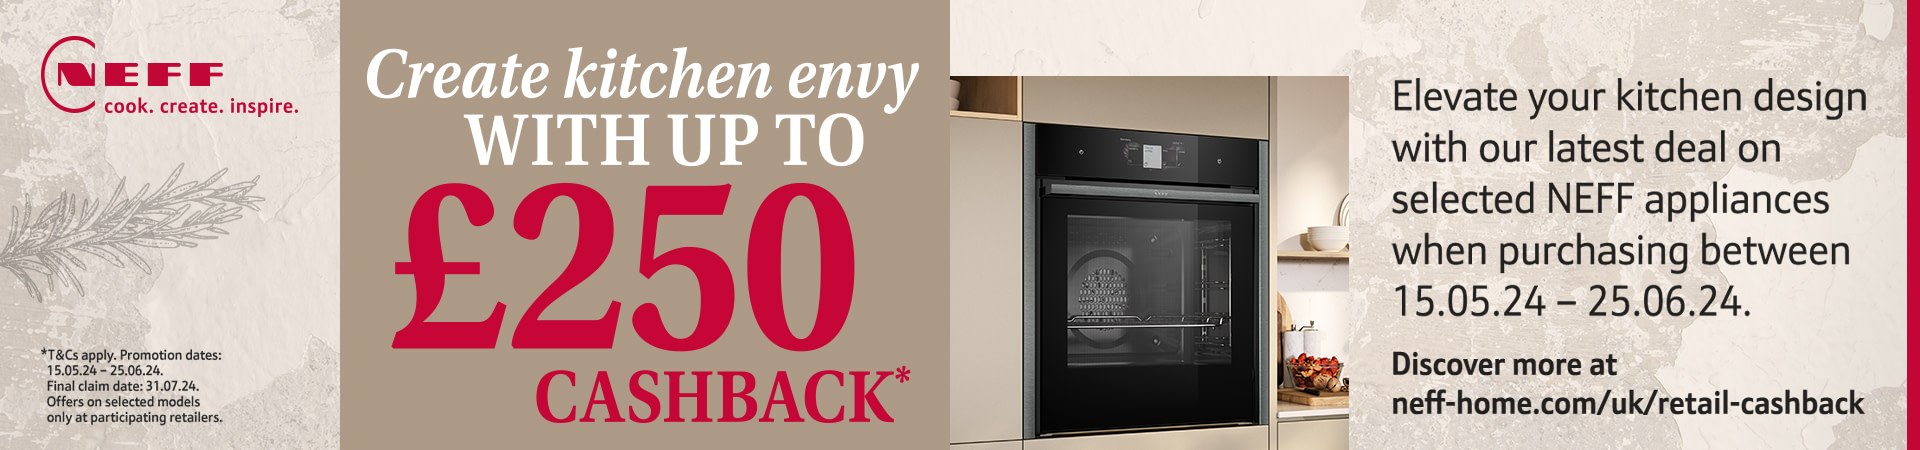 Text says 'NEFF: Create kitchen envy with up to £250 cashback! Elevate your kitchen design with our latest deal on selected NEFF appliances when purchasing between 15.05.24 - 25.06.24'